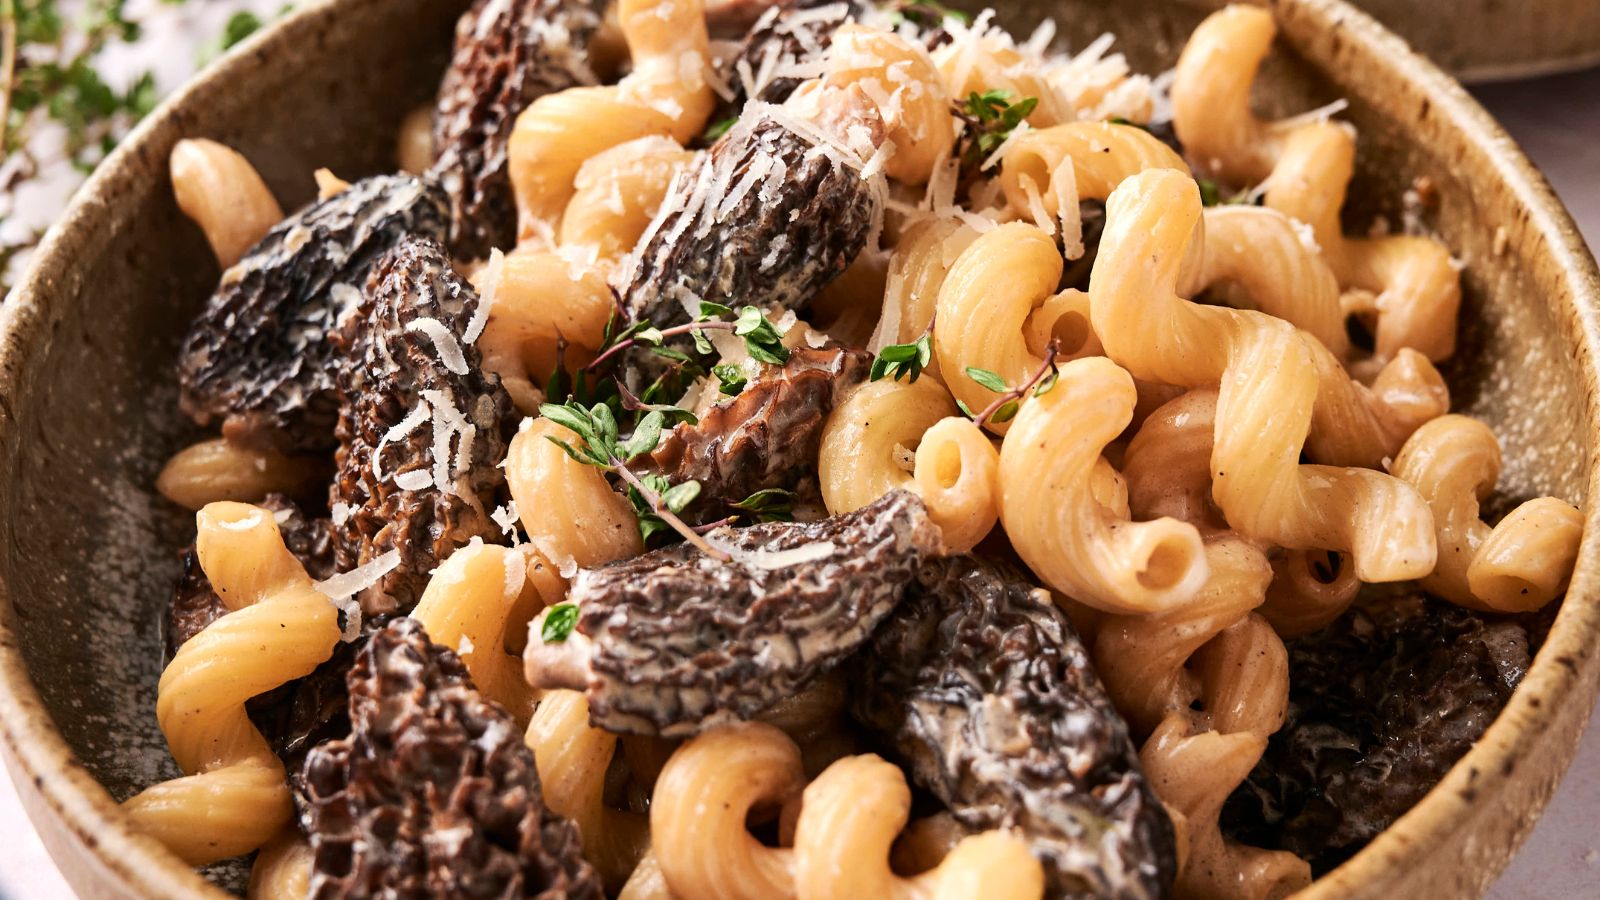 <p>For those special occasions when you want to indulge in something truly extraordinary, this dish is sure to impress. Morel Mushroom Pasta is an elegant, earthy plate that upgrades your dining experience. It’s the perfect choice for an intimate dinner or when you want to treat yourself to the finer things in life.<br><strong>Get the Recipe: </strong><a href="https://www.splashoftaste.com/morel-mushroom-pasta/?utm_source=msn&utm_medium=page&utm_campaign=msn">Morel Mushroom Pasta</a></p>